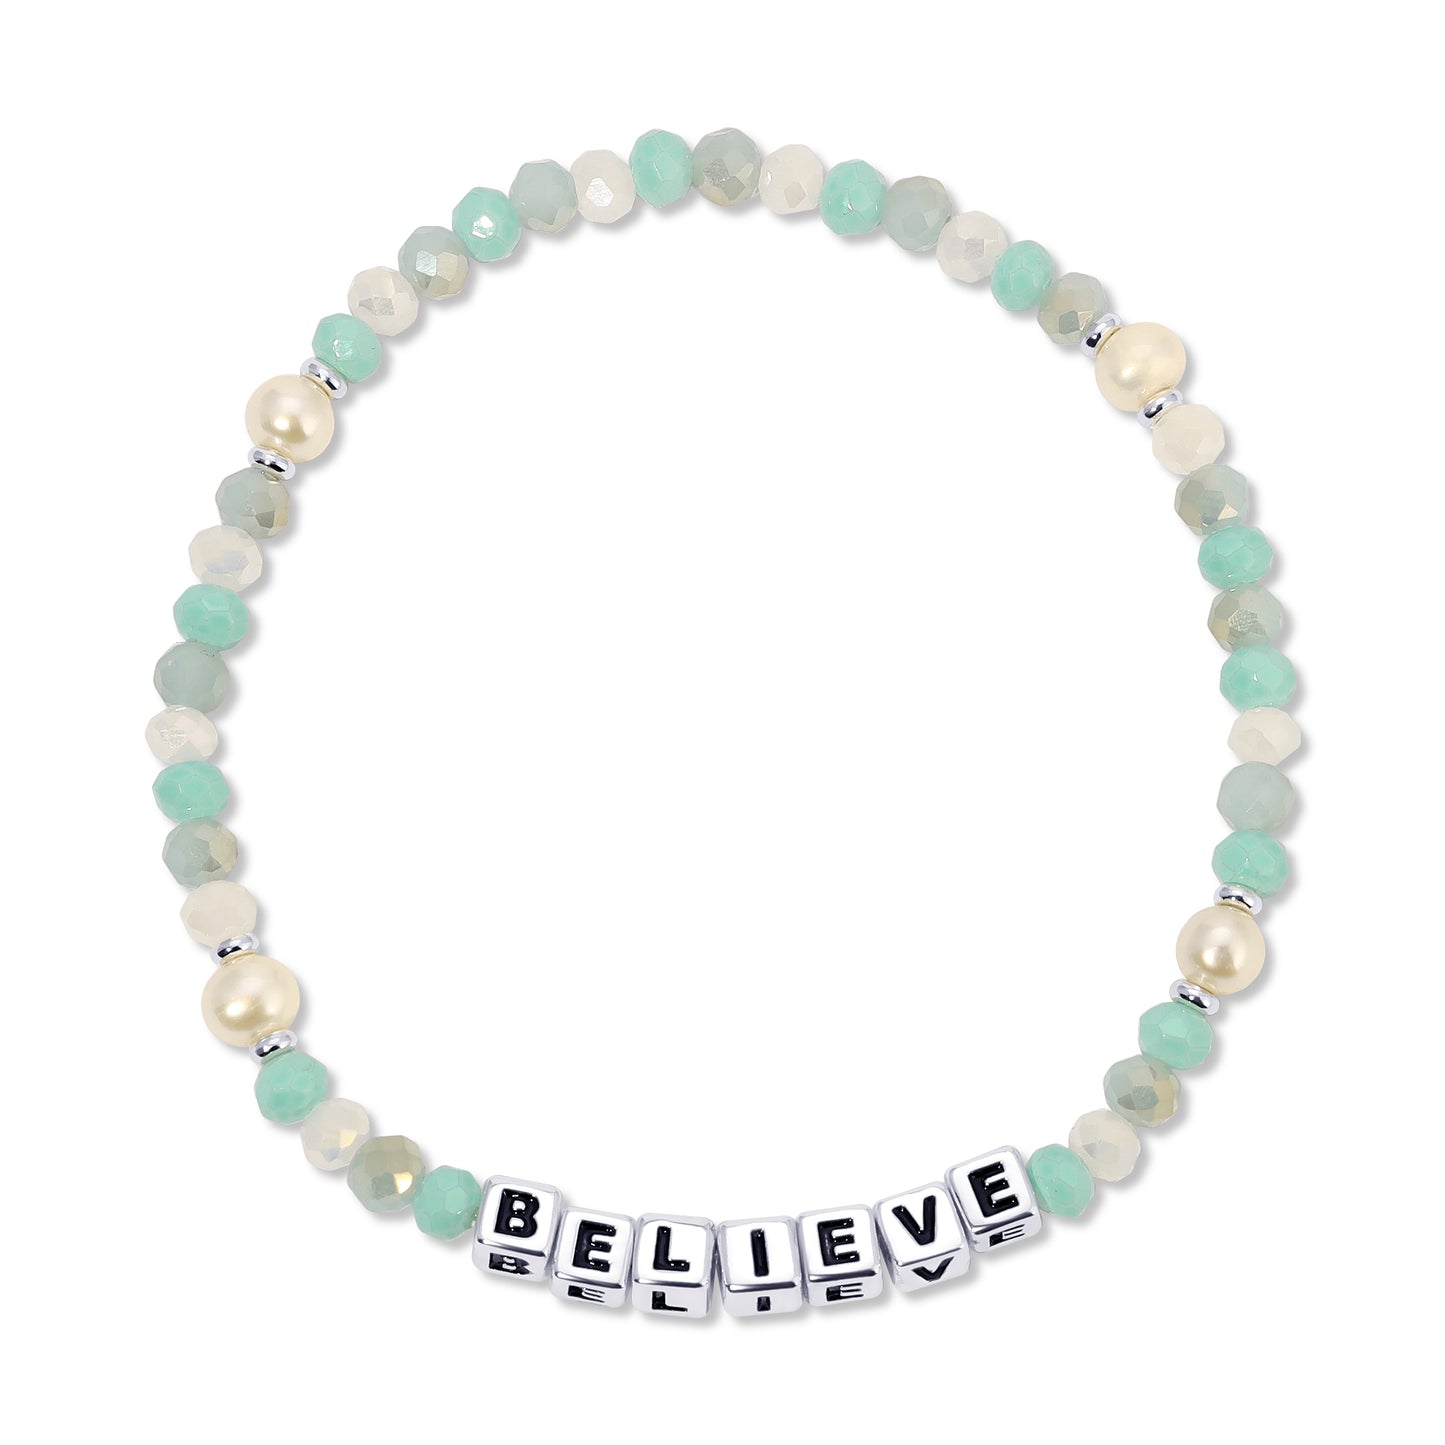 BELIEVE Colorful Words Bracelet Sterling Silver Plated Letters and Accents